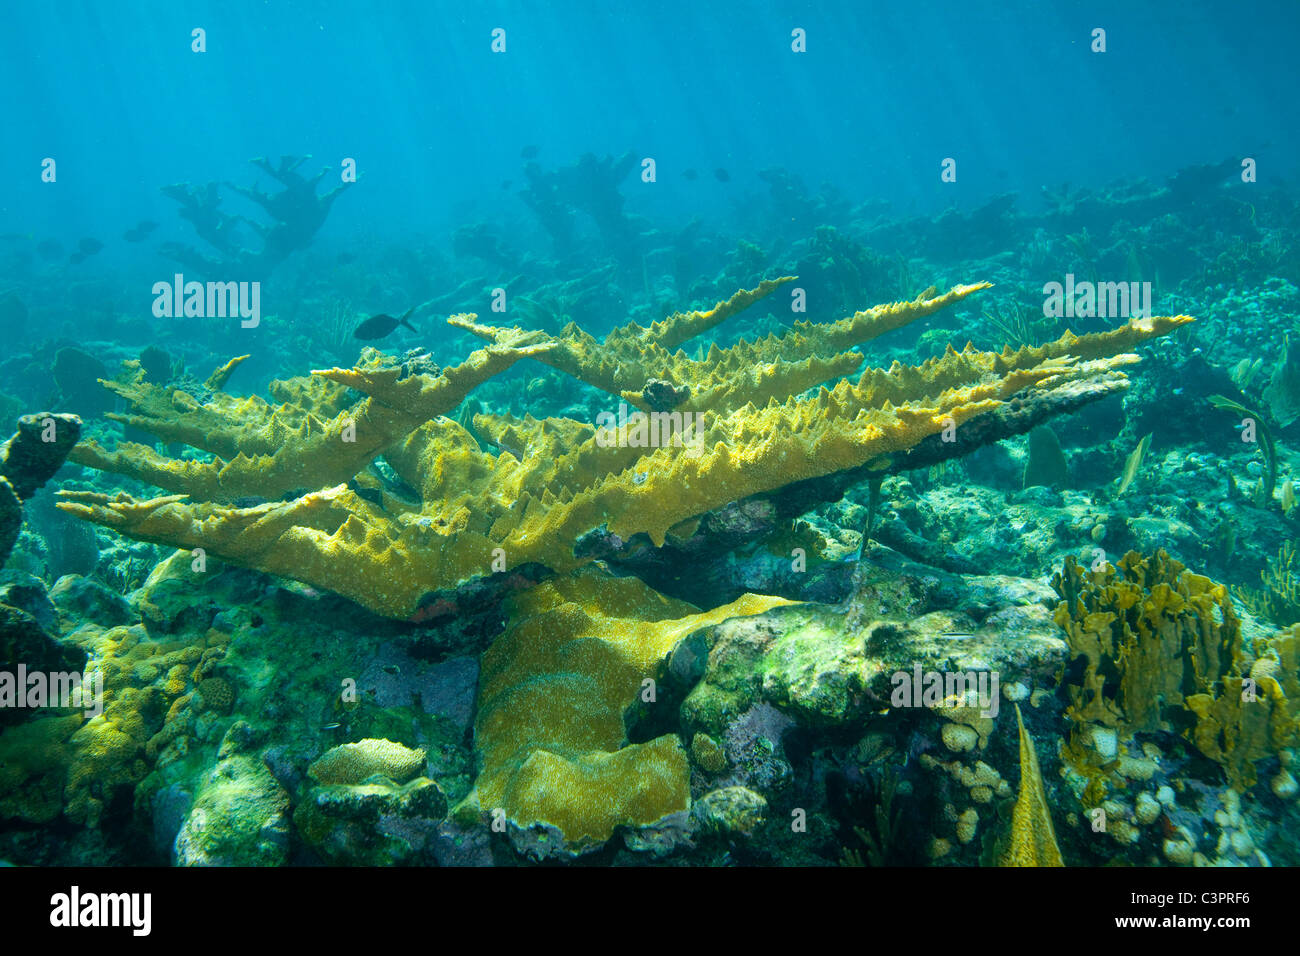 A healthy stand of Elkhorn Coral (Acropora palmata) on a shallow reef in Cuba. Stock Photo